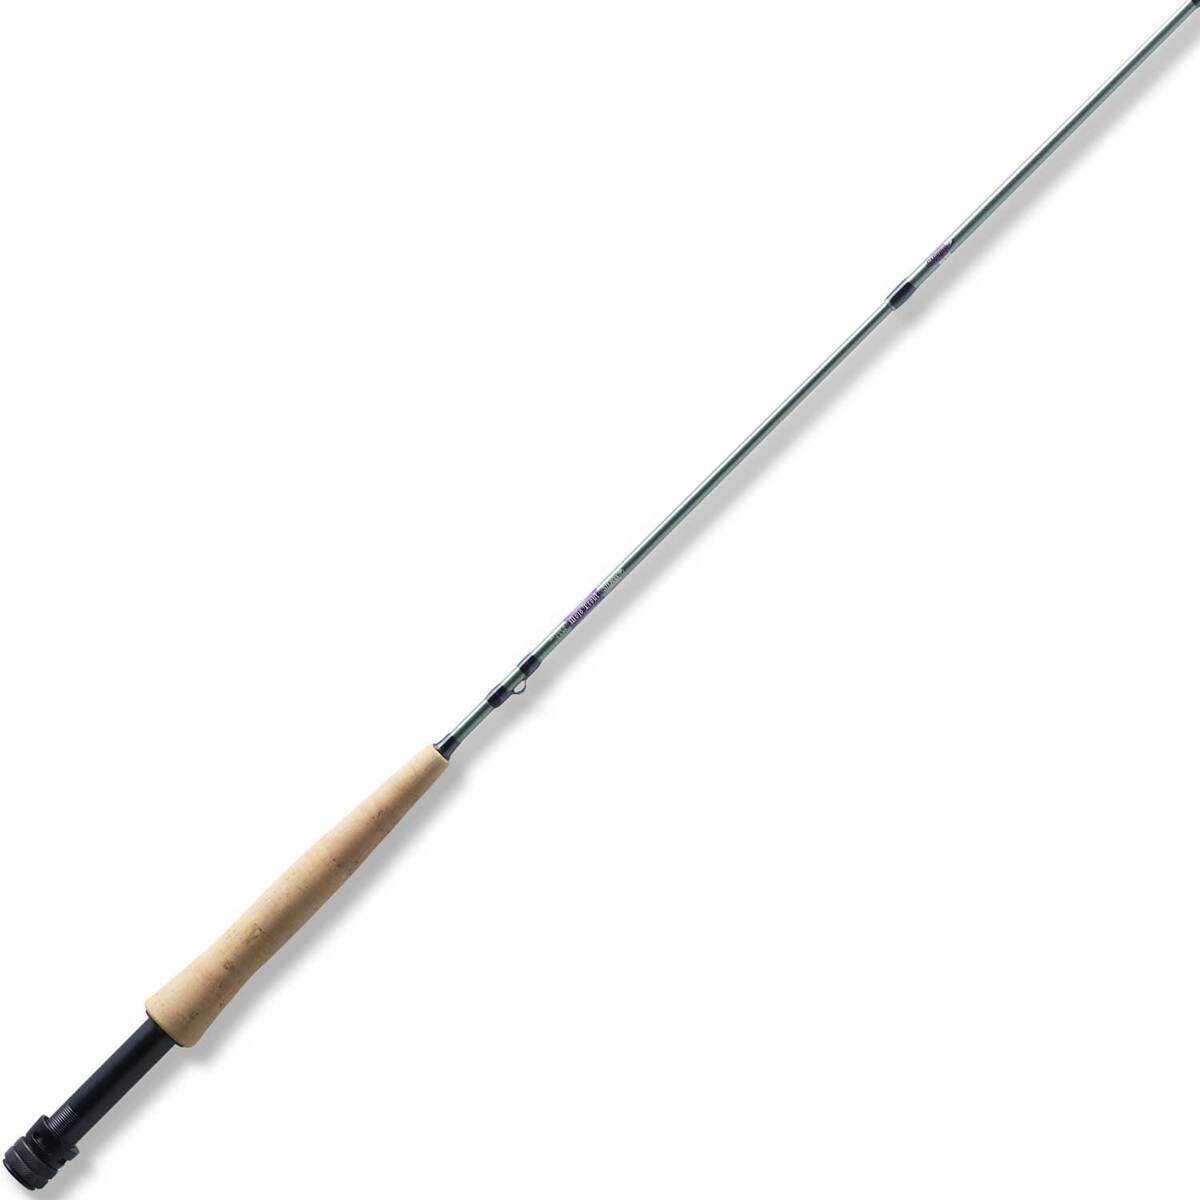 Riversider Centerpin Float Fly Fishing Rod and Reel Combo - 13ft